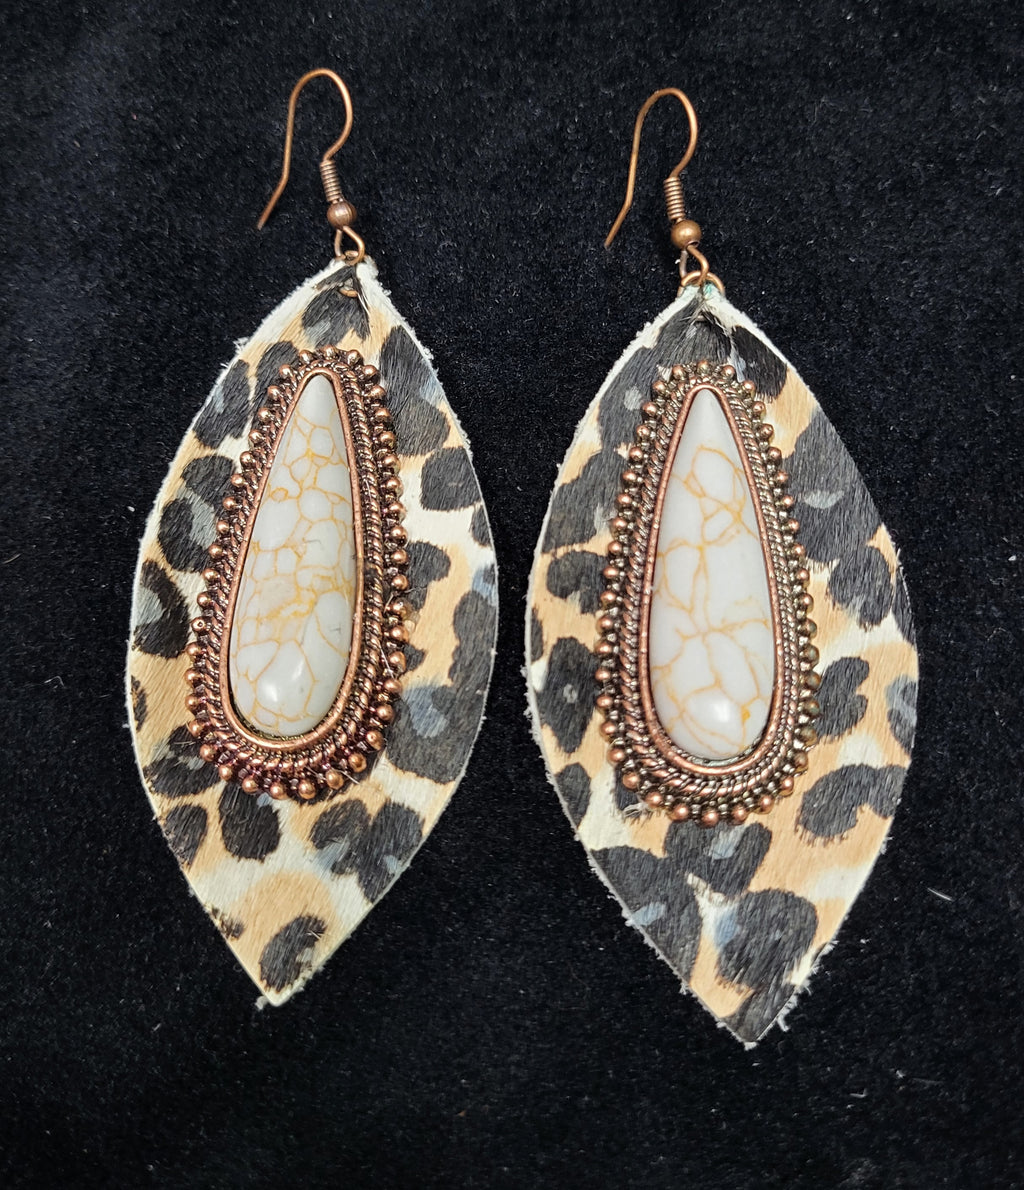 LEOPARD HIDE WITH IVORY CONCHO EARRINGS - Lil Monkey Boutique